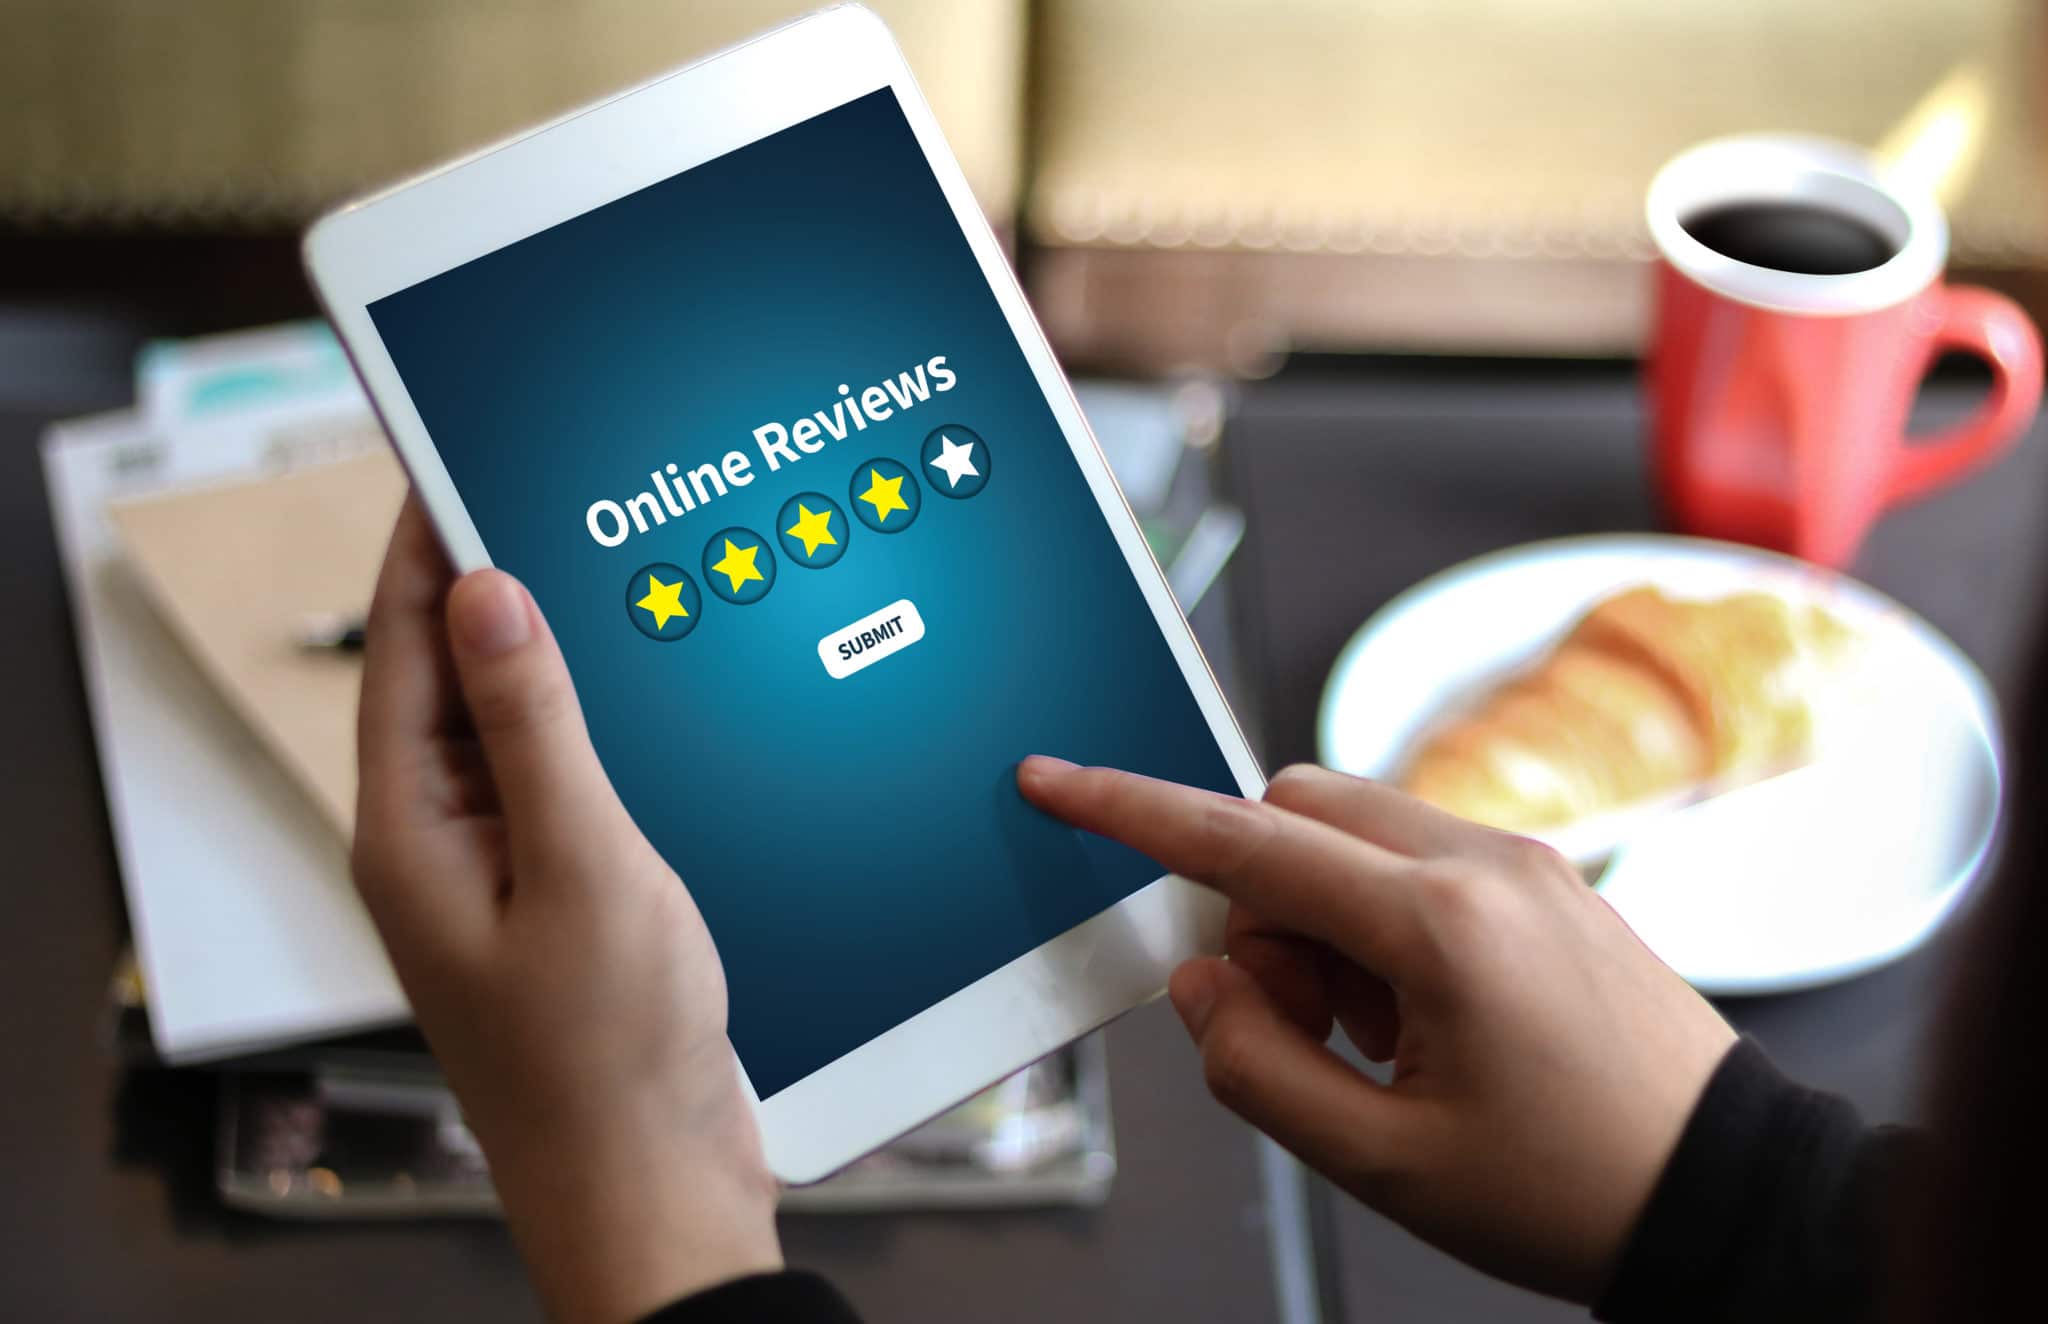 Online reviews and ratings